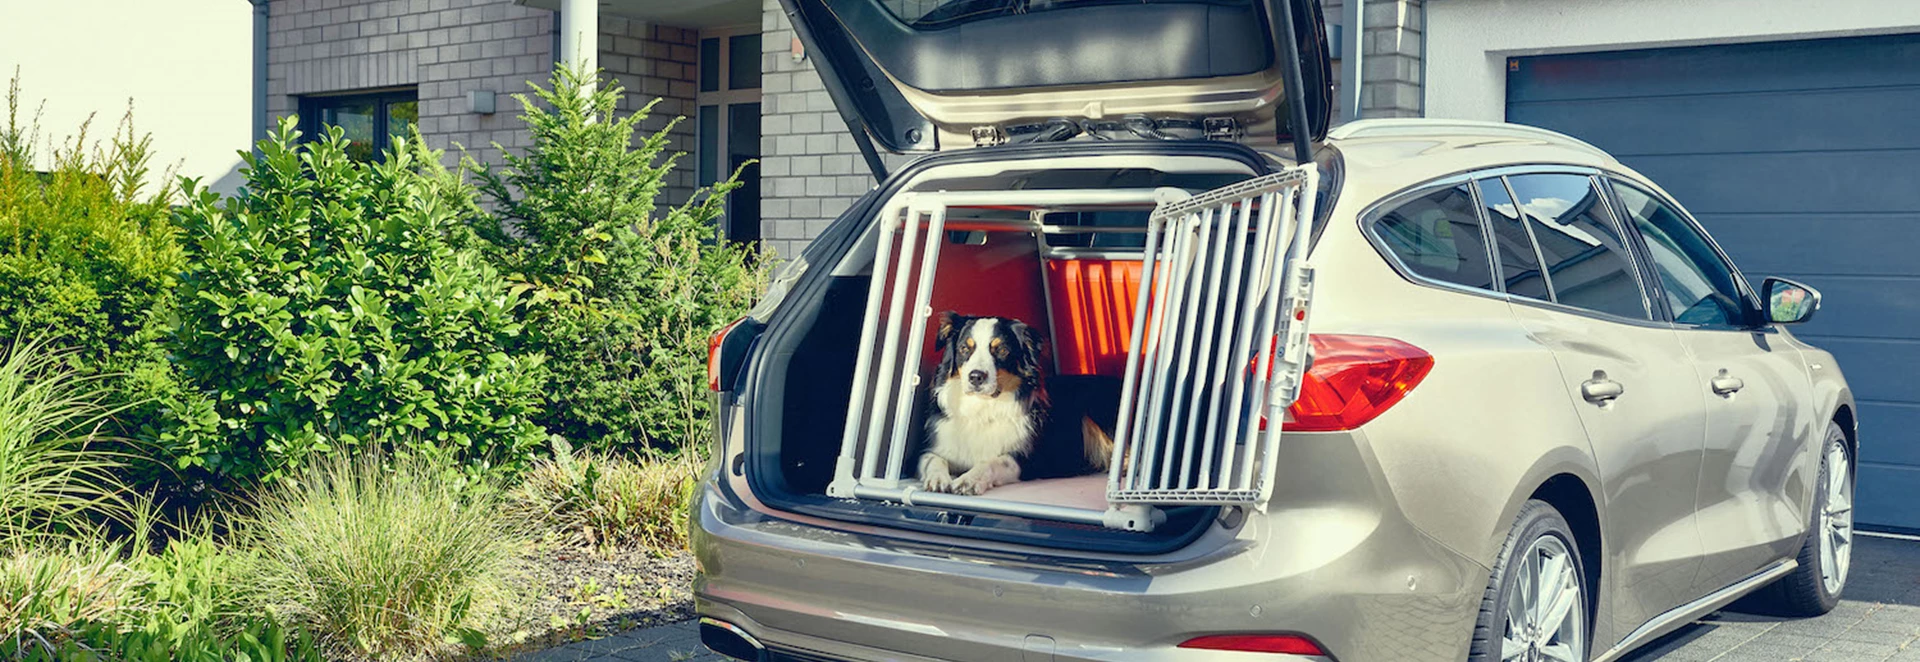 Third of dog-owning drivers risk safety by letting pets roam in car